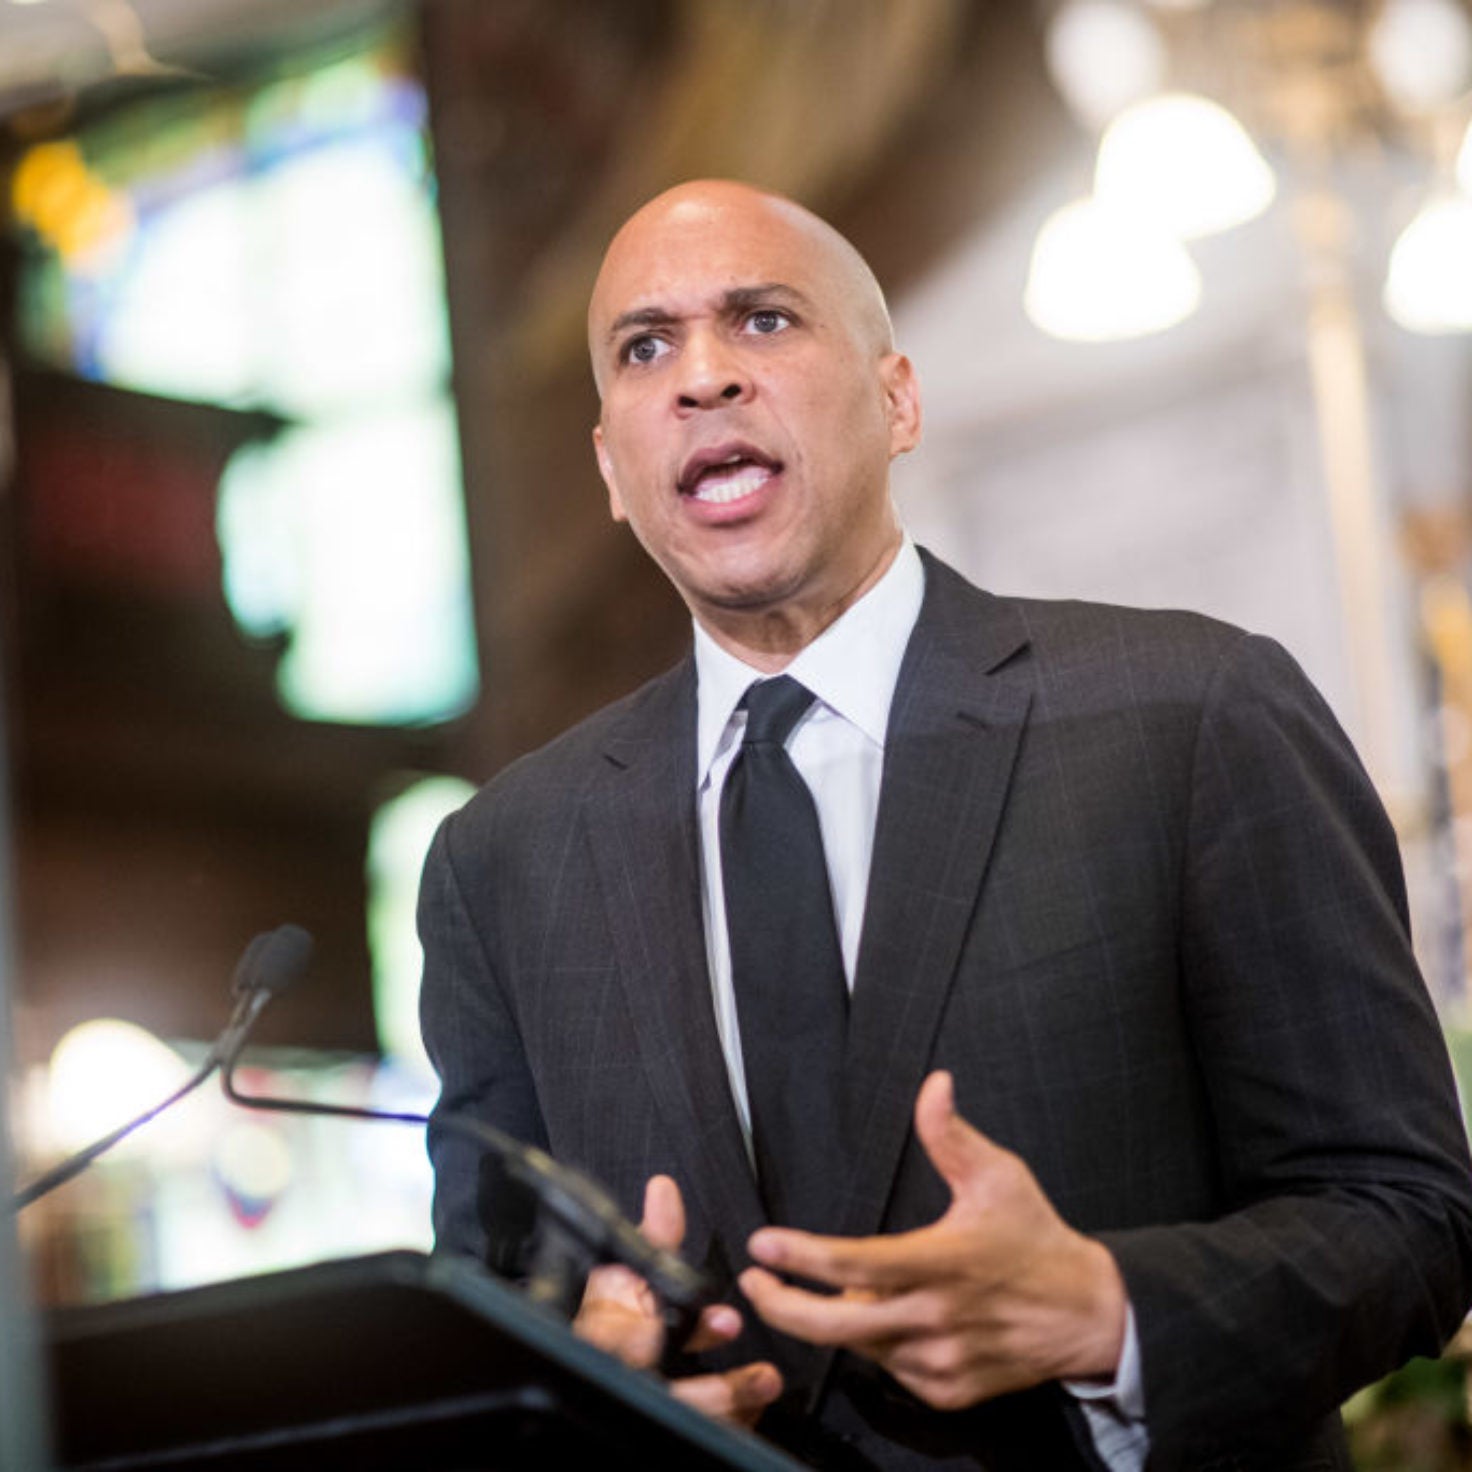 Cory Booker: EPA Has 'Responsibility' To Help Pay For Bottled Water During Newark Lead Crisis